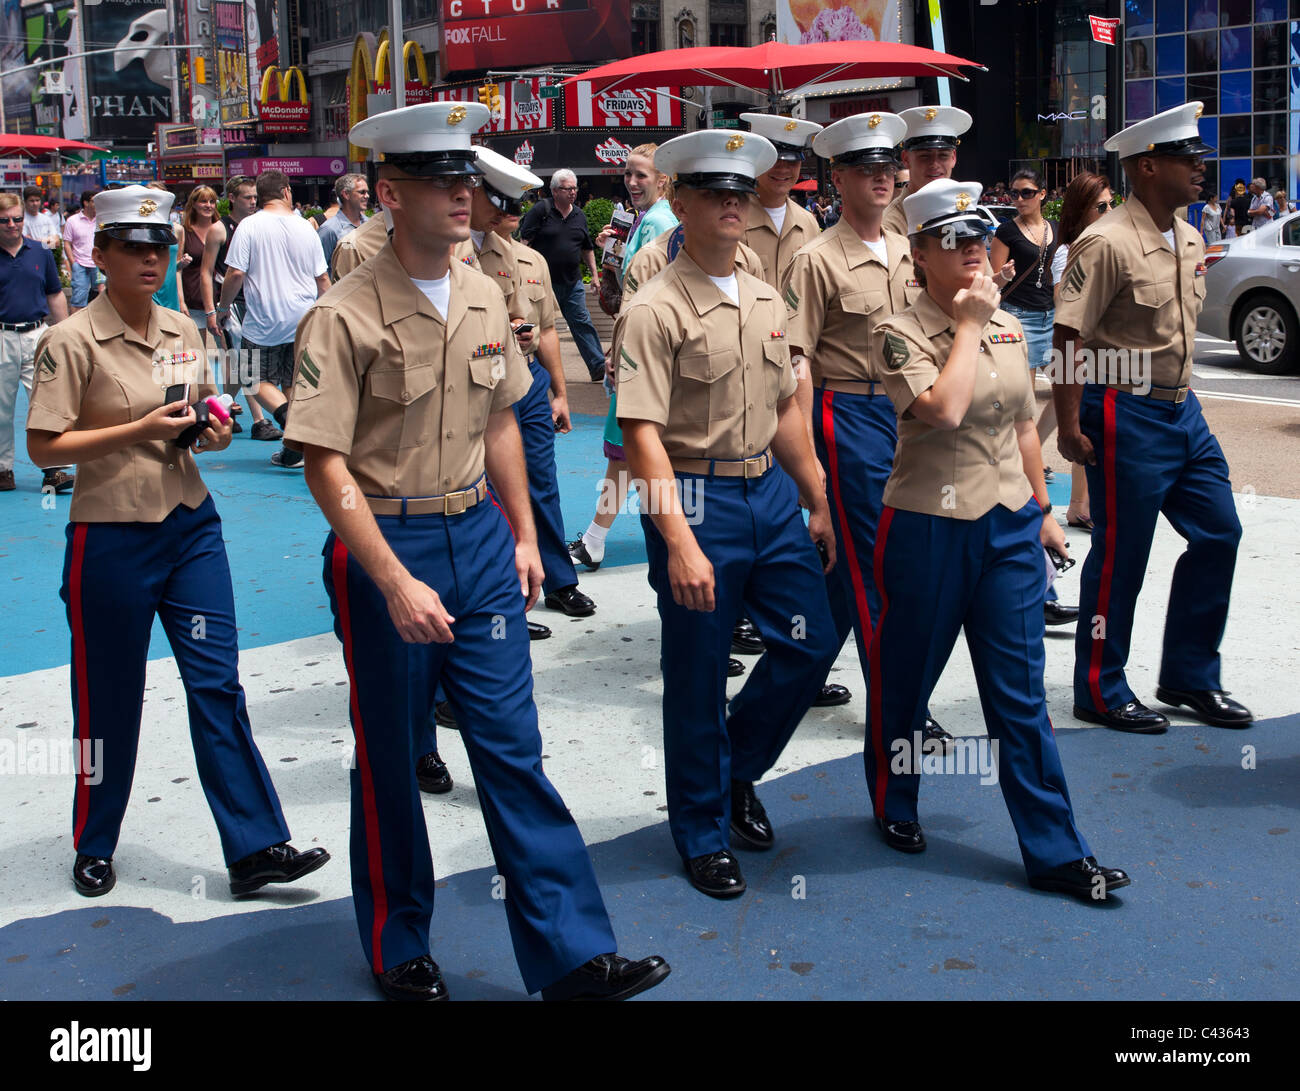 United States Marine Corps armed forces personnel in uniform on leave, Times Square, New York City, USA Stock Photo